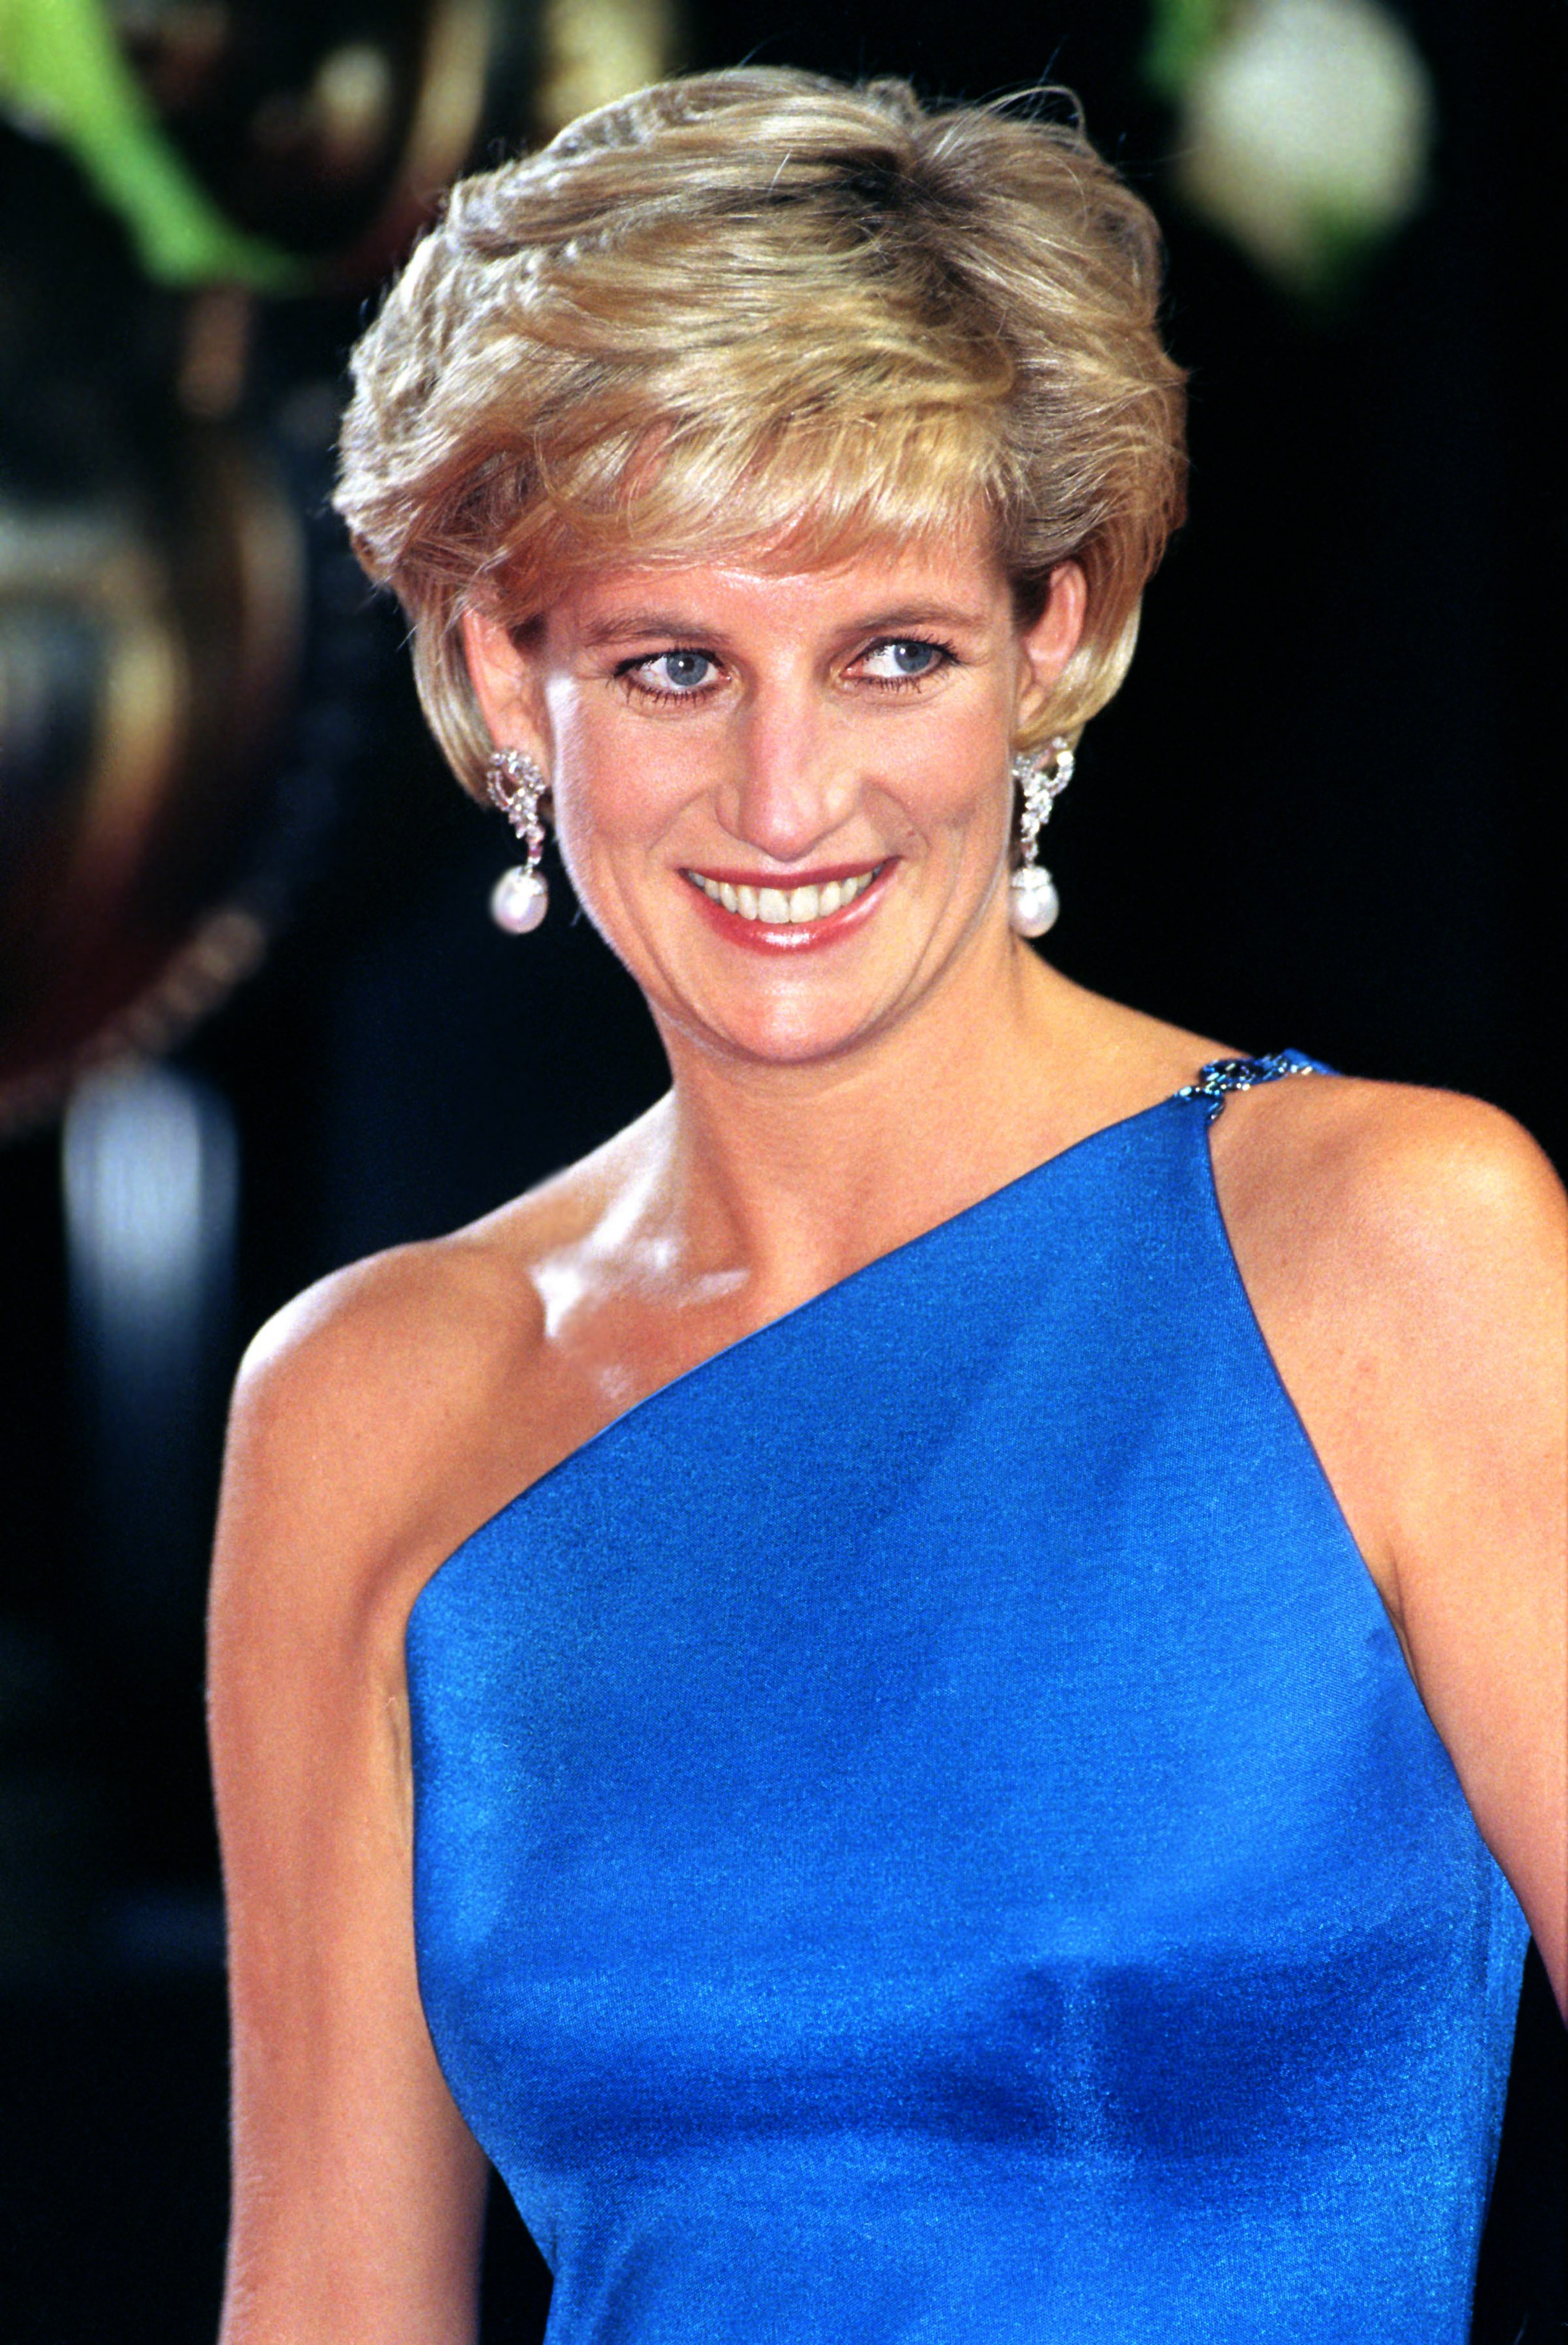 Diana, Princess of Wales, at the Victor Chang Research Institute dinner dance during her visit to Sydney, Australia on October 31, 1996 | Source: Getty Images